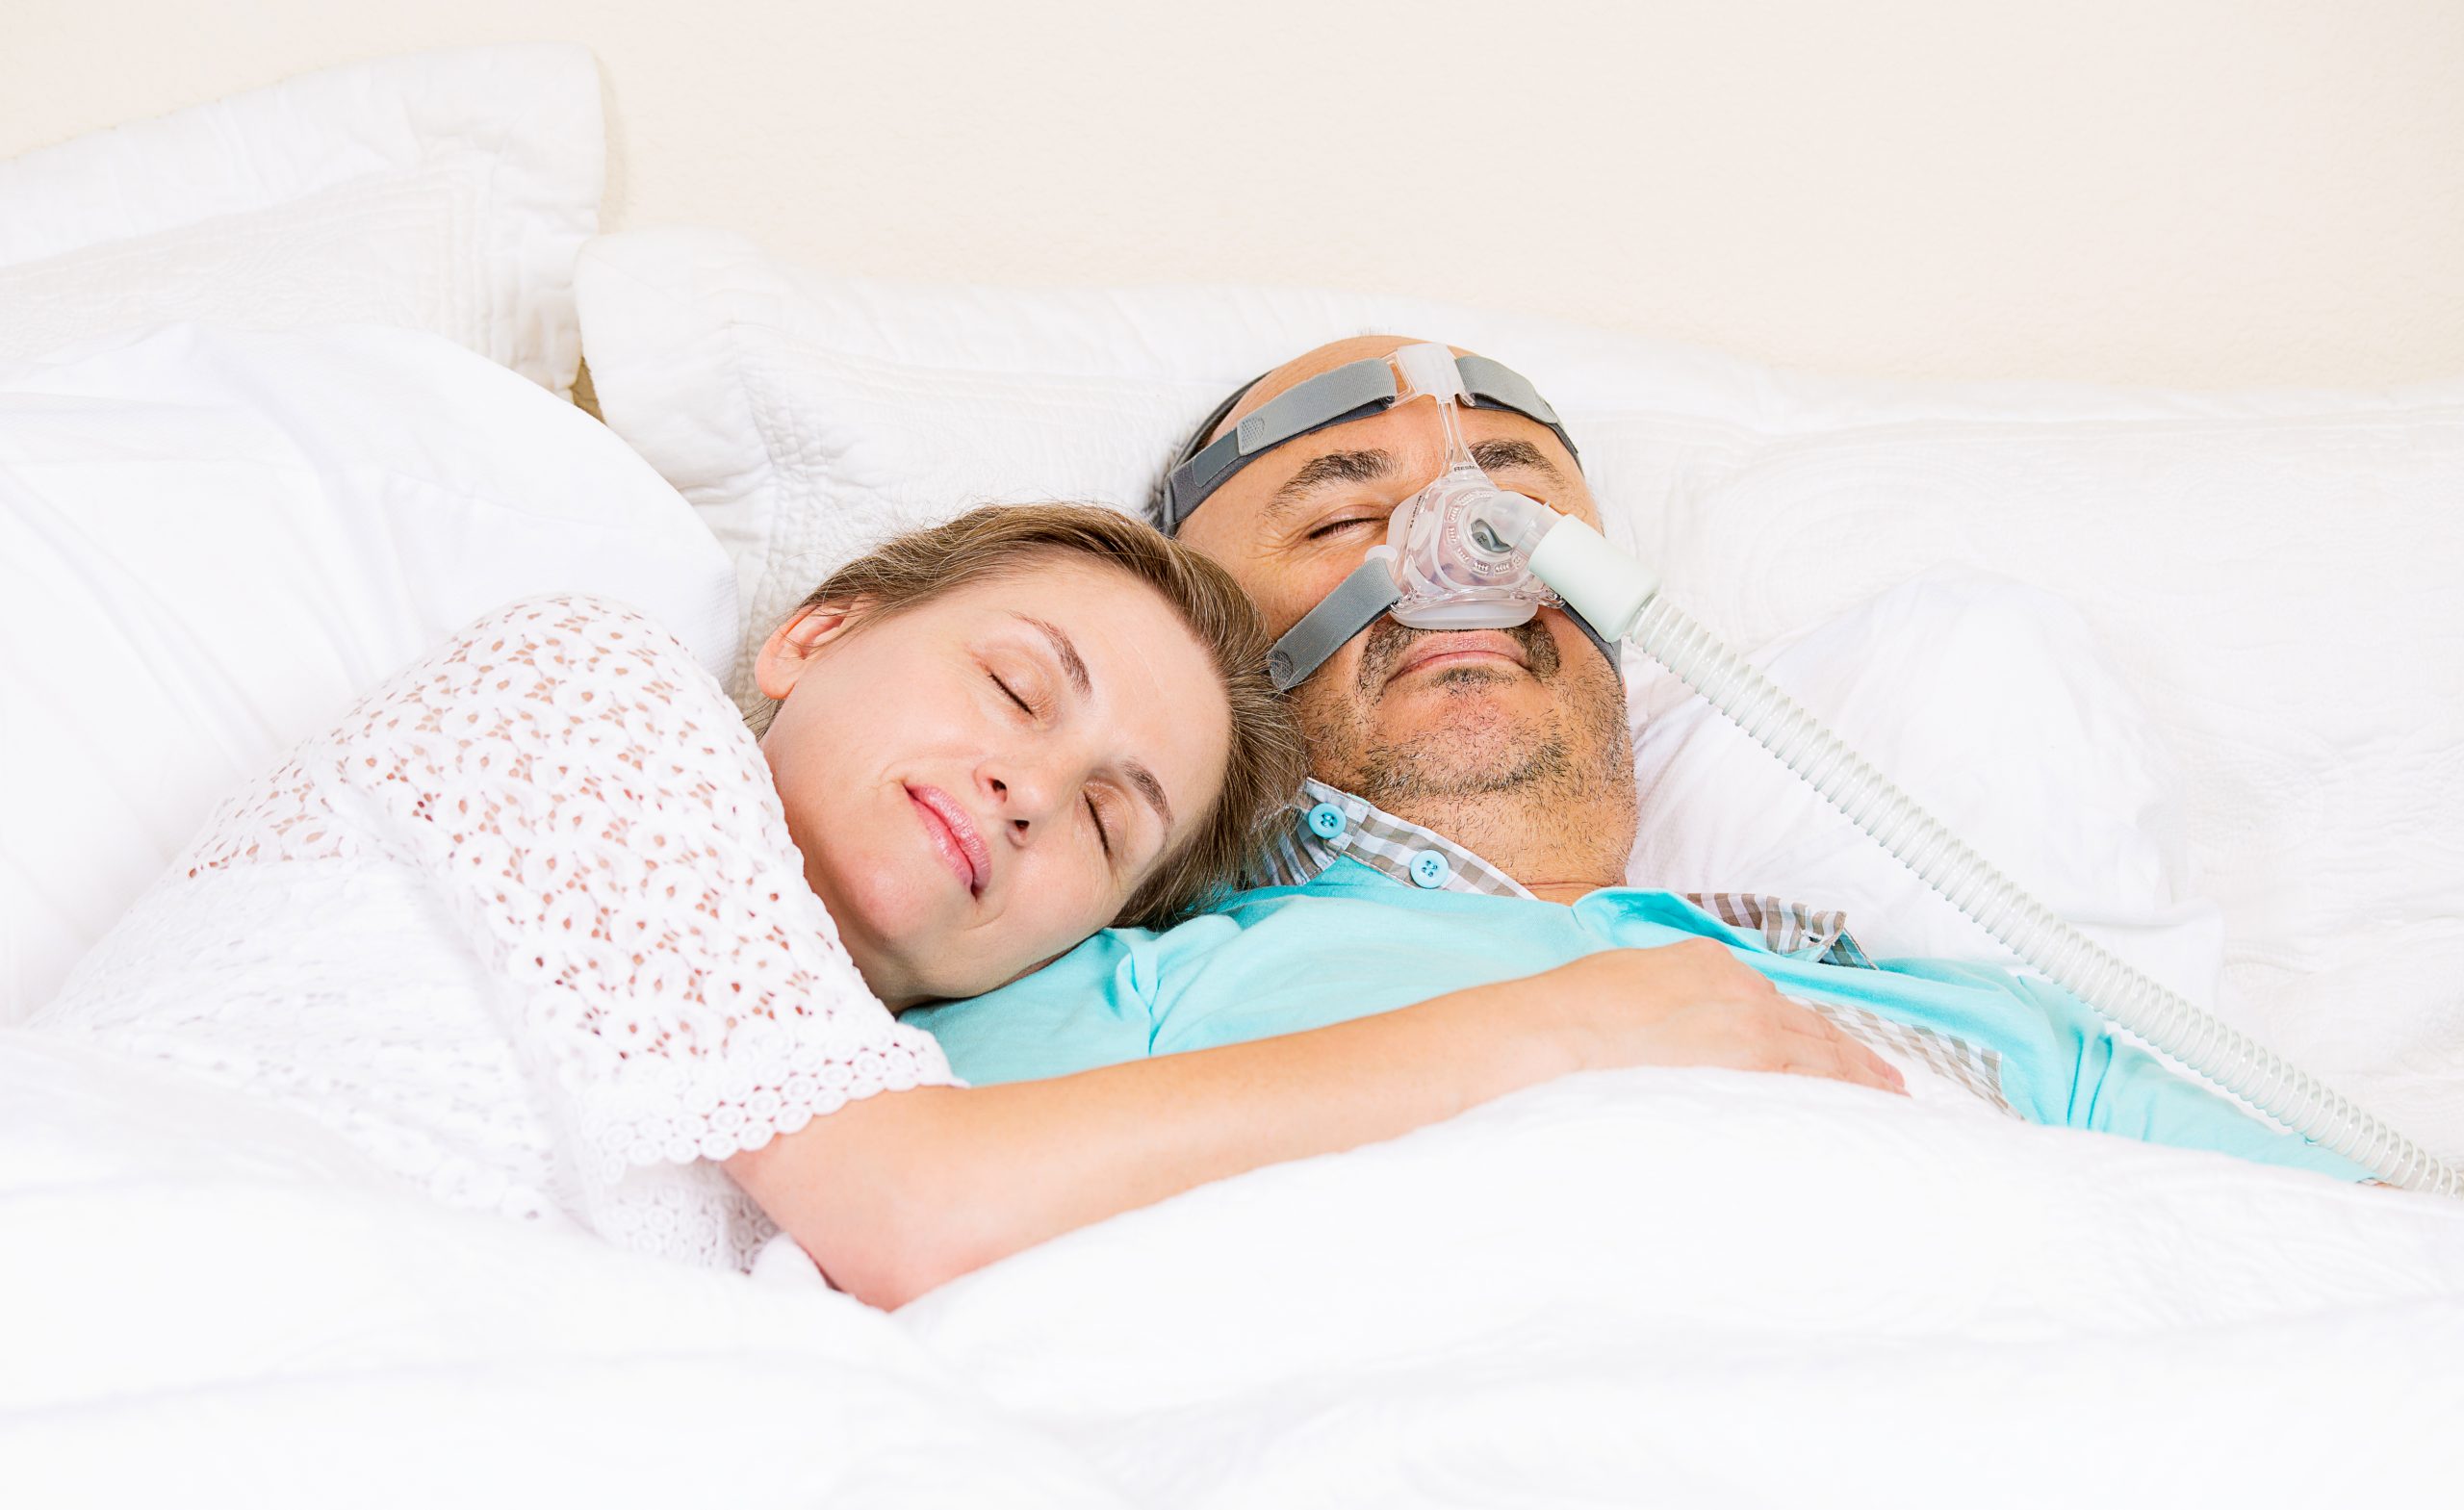 man with sleeping apnea and CPAP machine sleeping peacefully with wife in bedroom